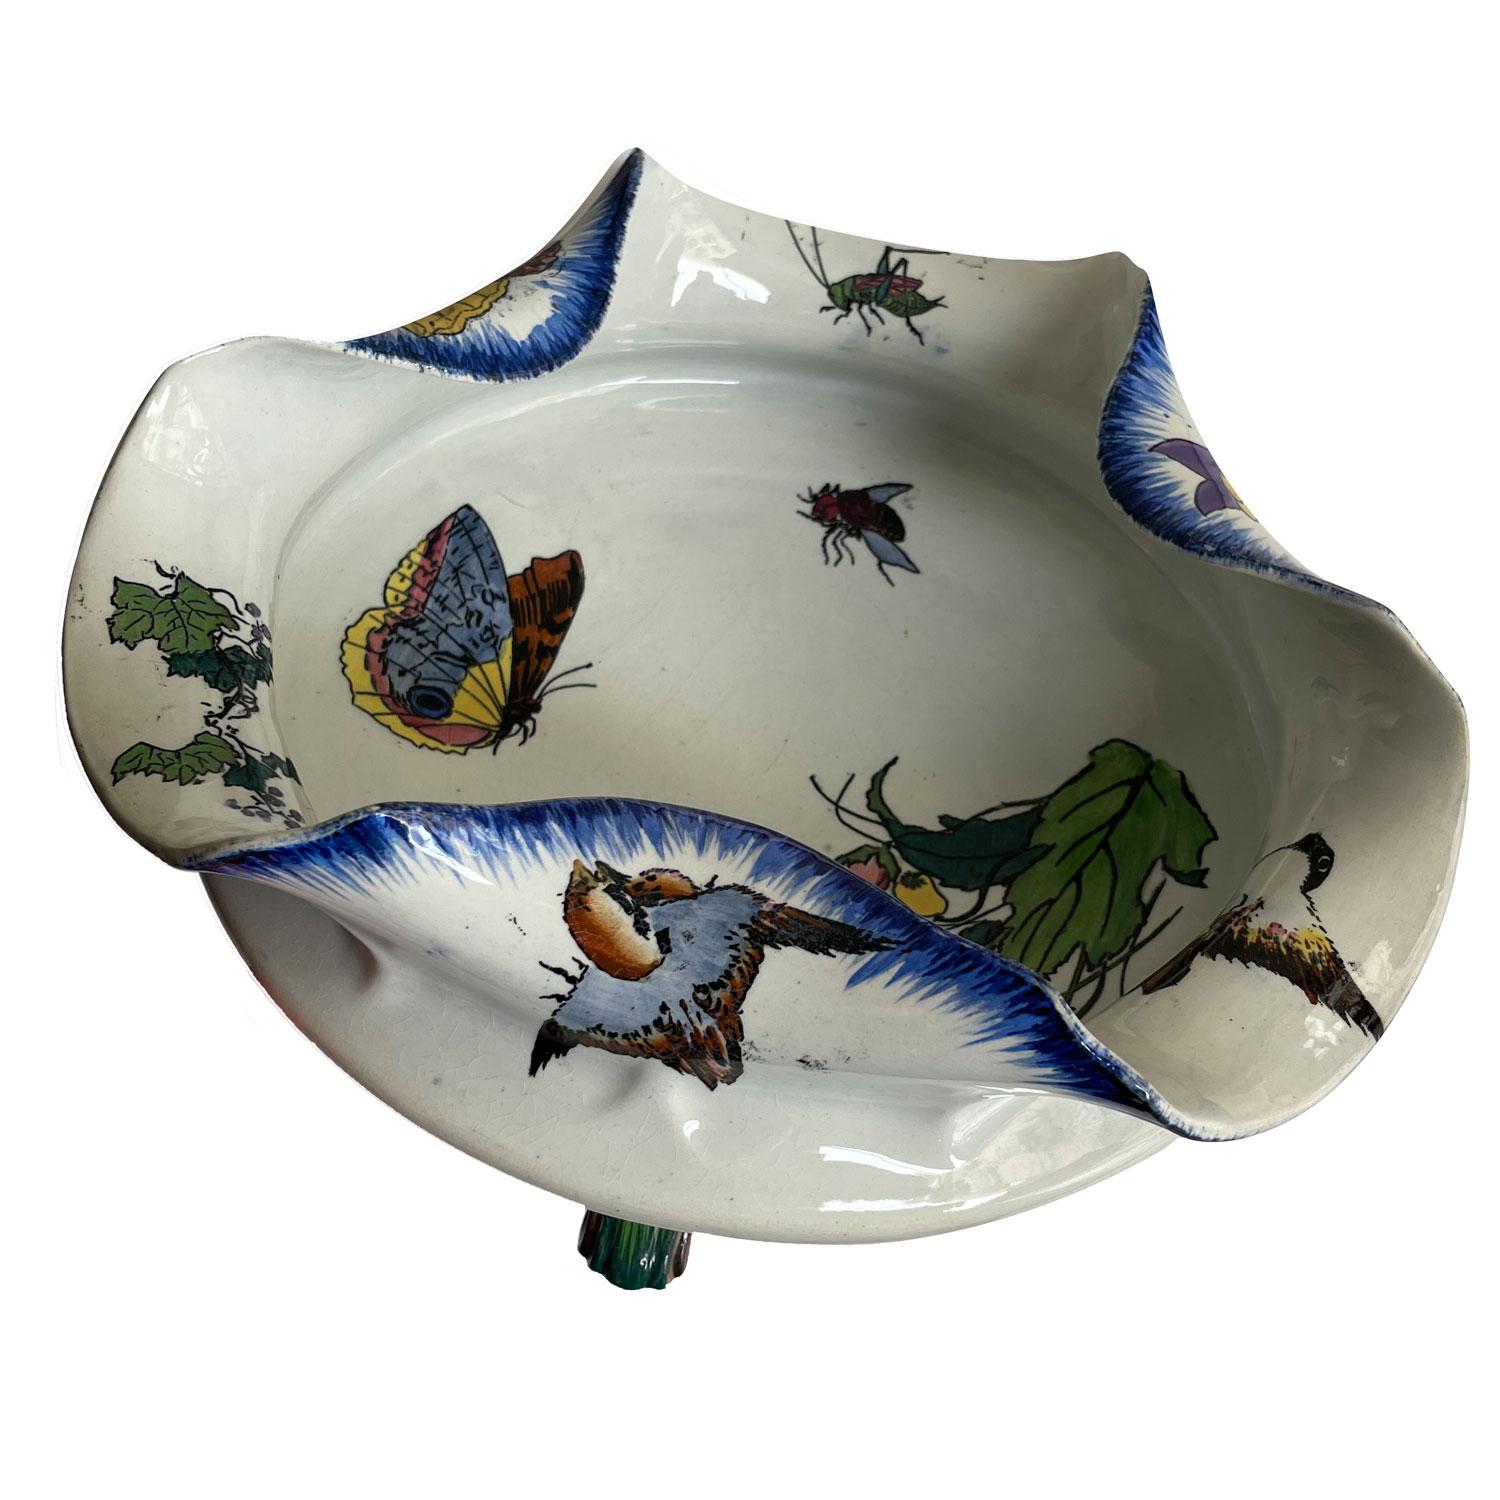 French Folded Fruit Bowl 'Rousseau-Bracquemond' Service 1866-1875 For Sale